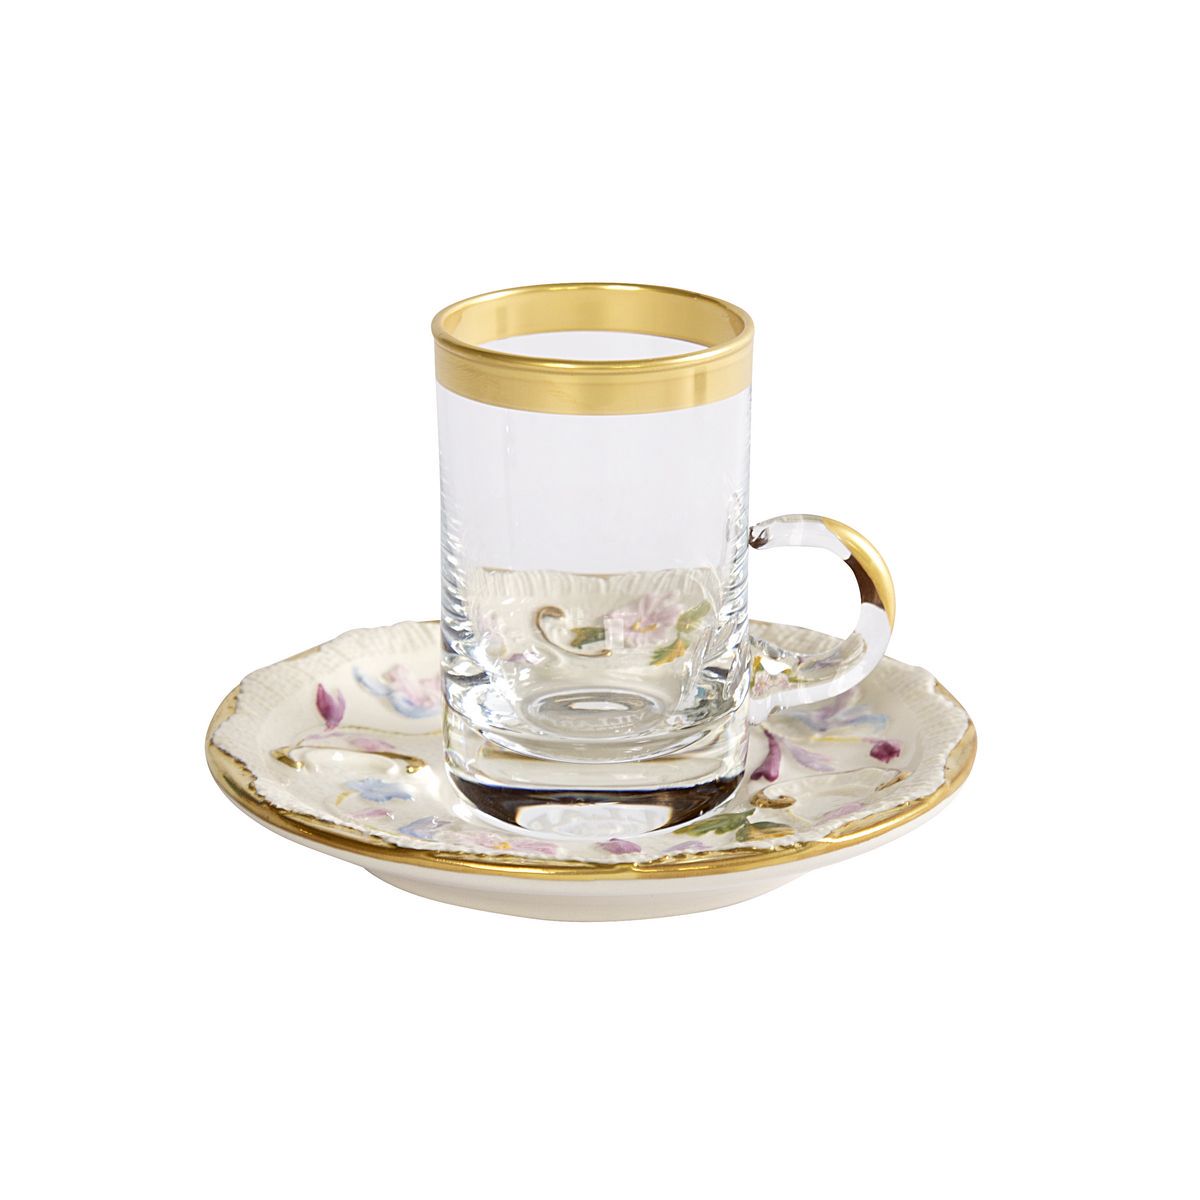 Taormina Multicolor & Gold Arabic Tea Cup And Saucer Small Size